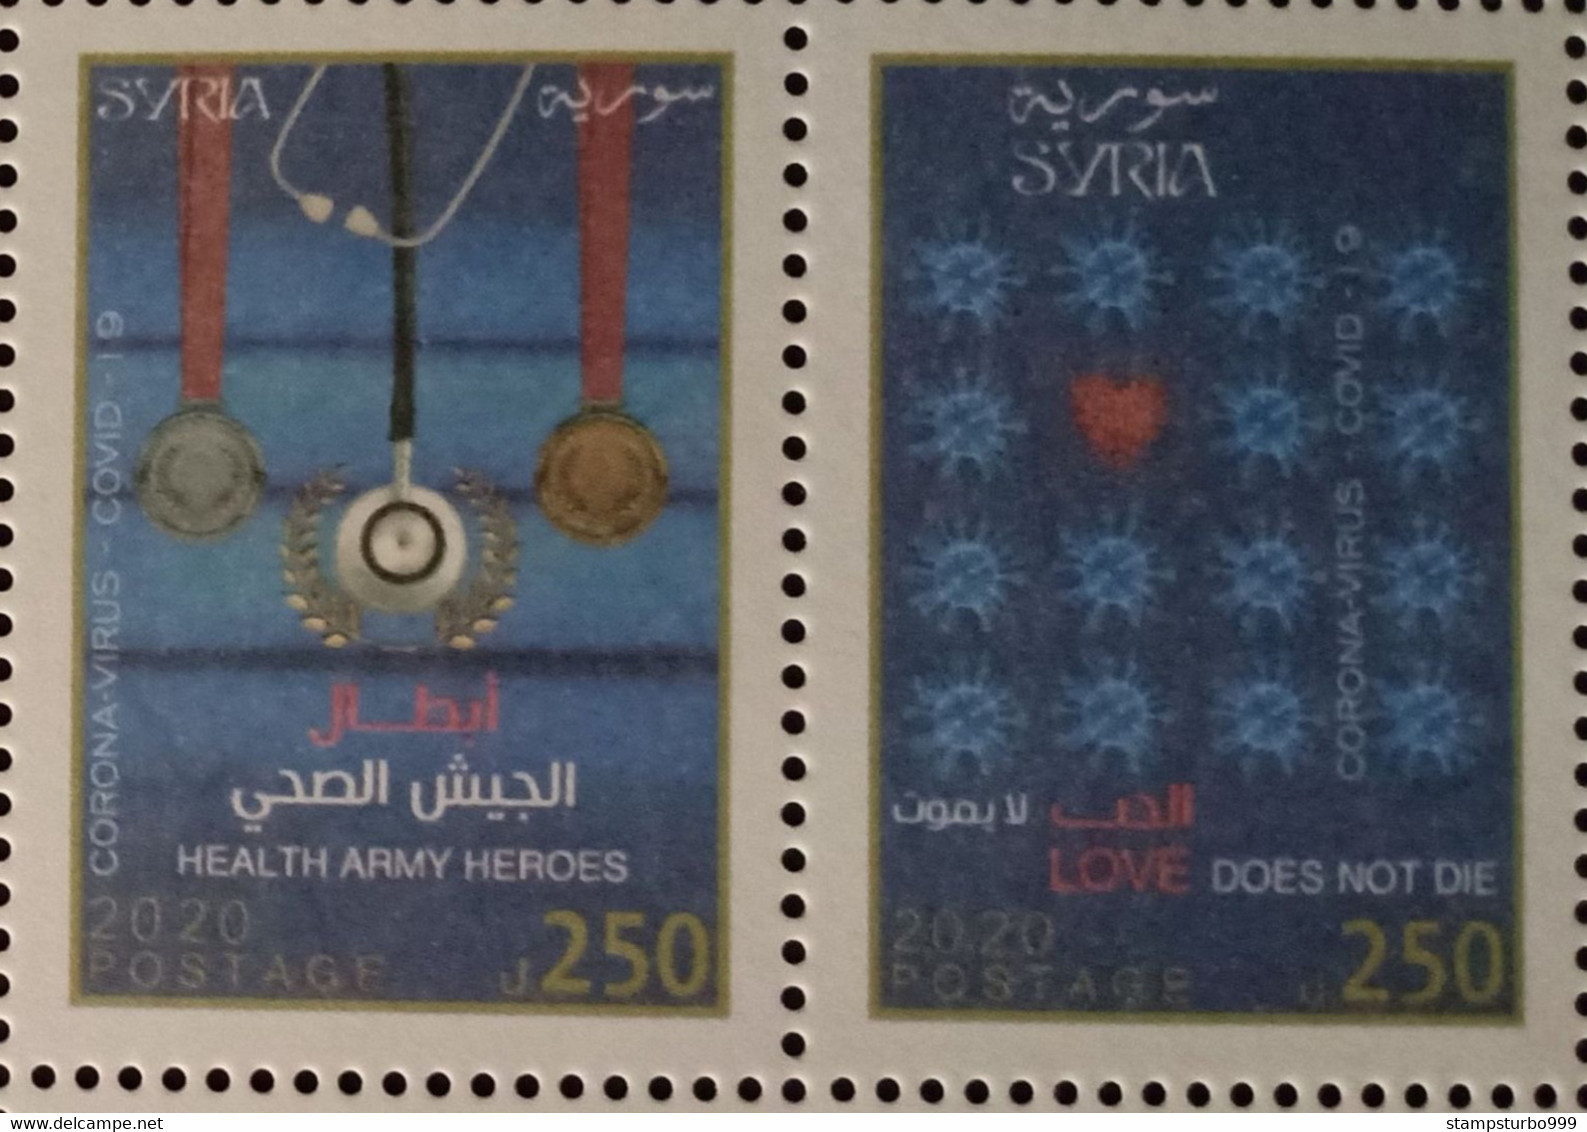 Syrien, Syrie, Syria 2020 Corona Virus (Covid-19)site As Photo, Very Rare Only 5000 Set Issued MNH ** - Nuovi